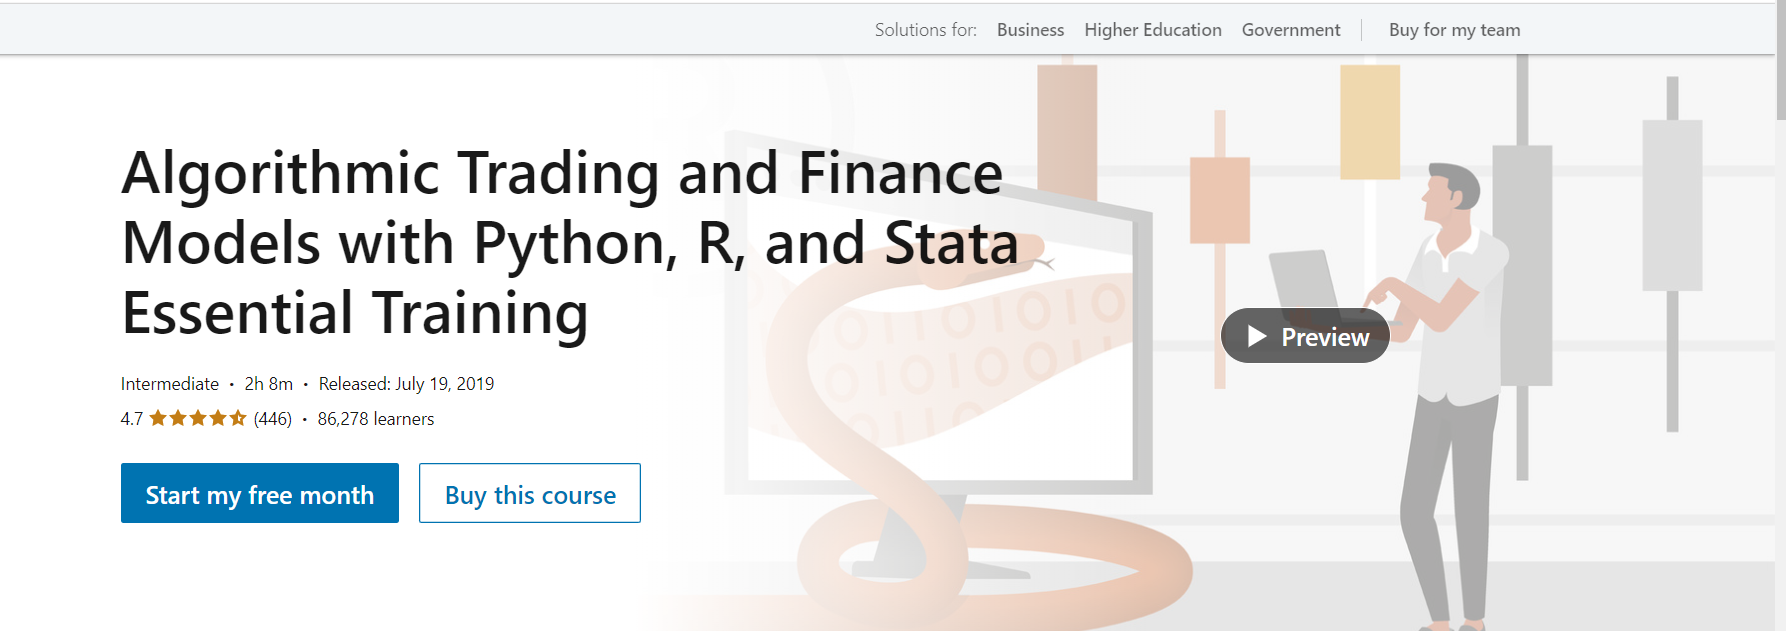 Algorithmic Trading and Finance Models with Python, R, and Stata Essential Training